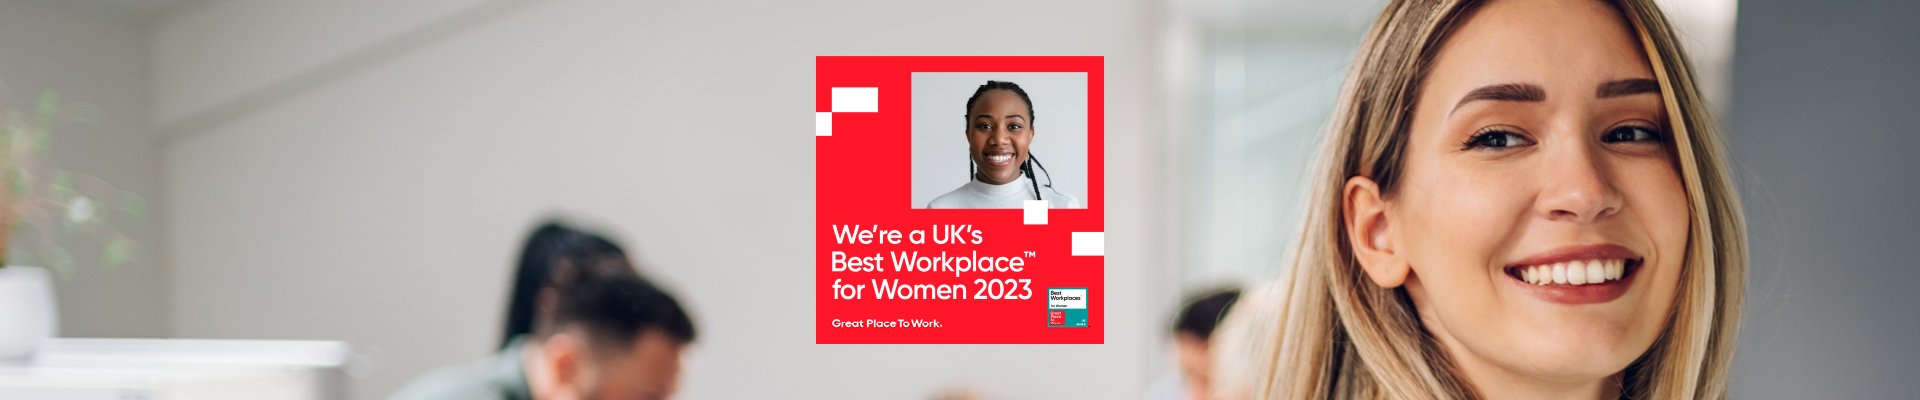 We’ve been recertified as one of the UK’s Best Workplaces™ for Women for the second year running!